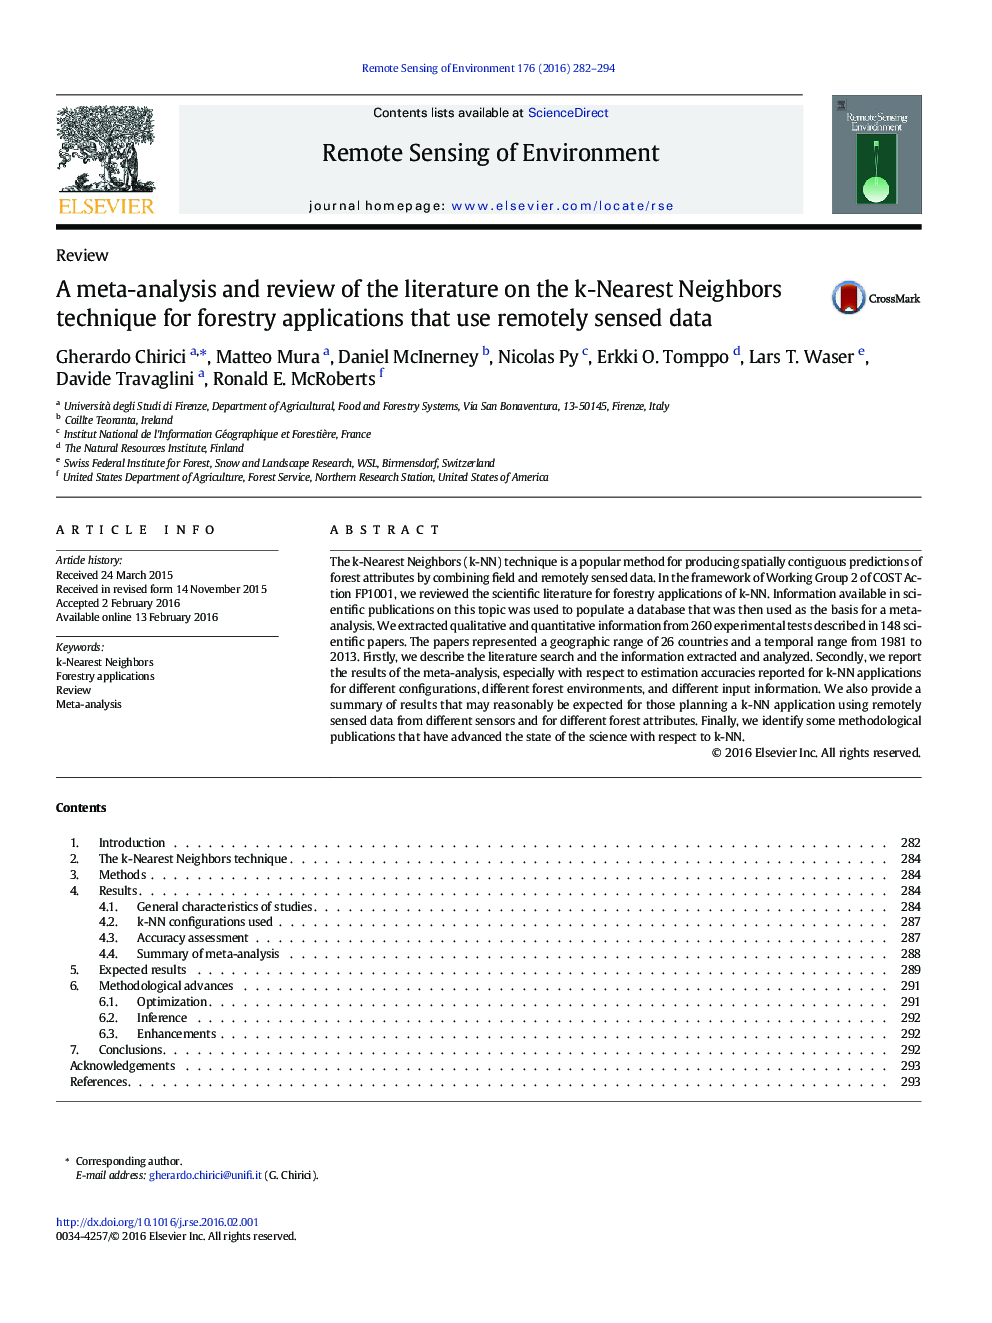 ReviewA meta-analysis and review of the literature on the k-Nearest Neighbors technique for forestry applications that use remotely sensed data